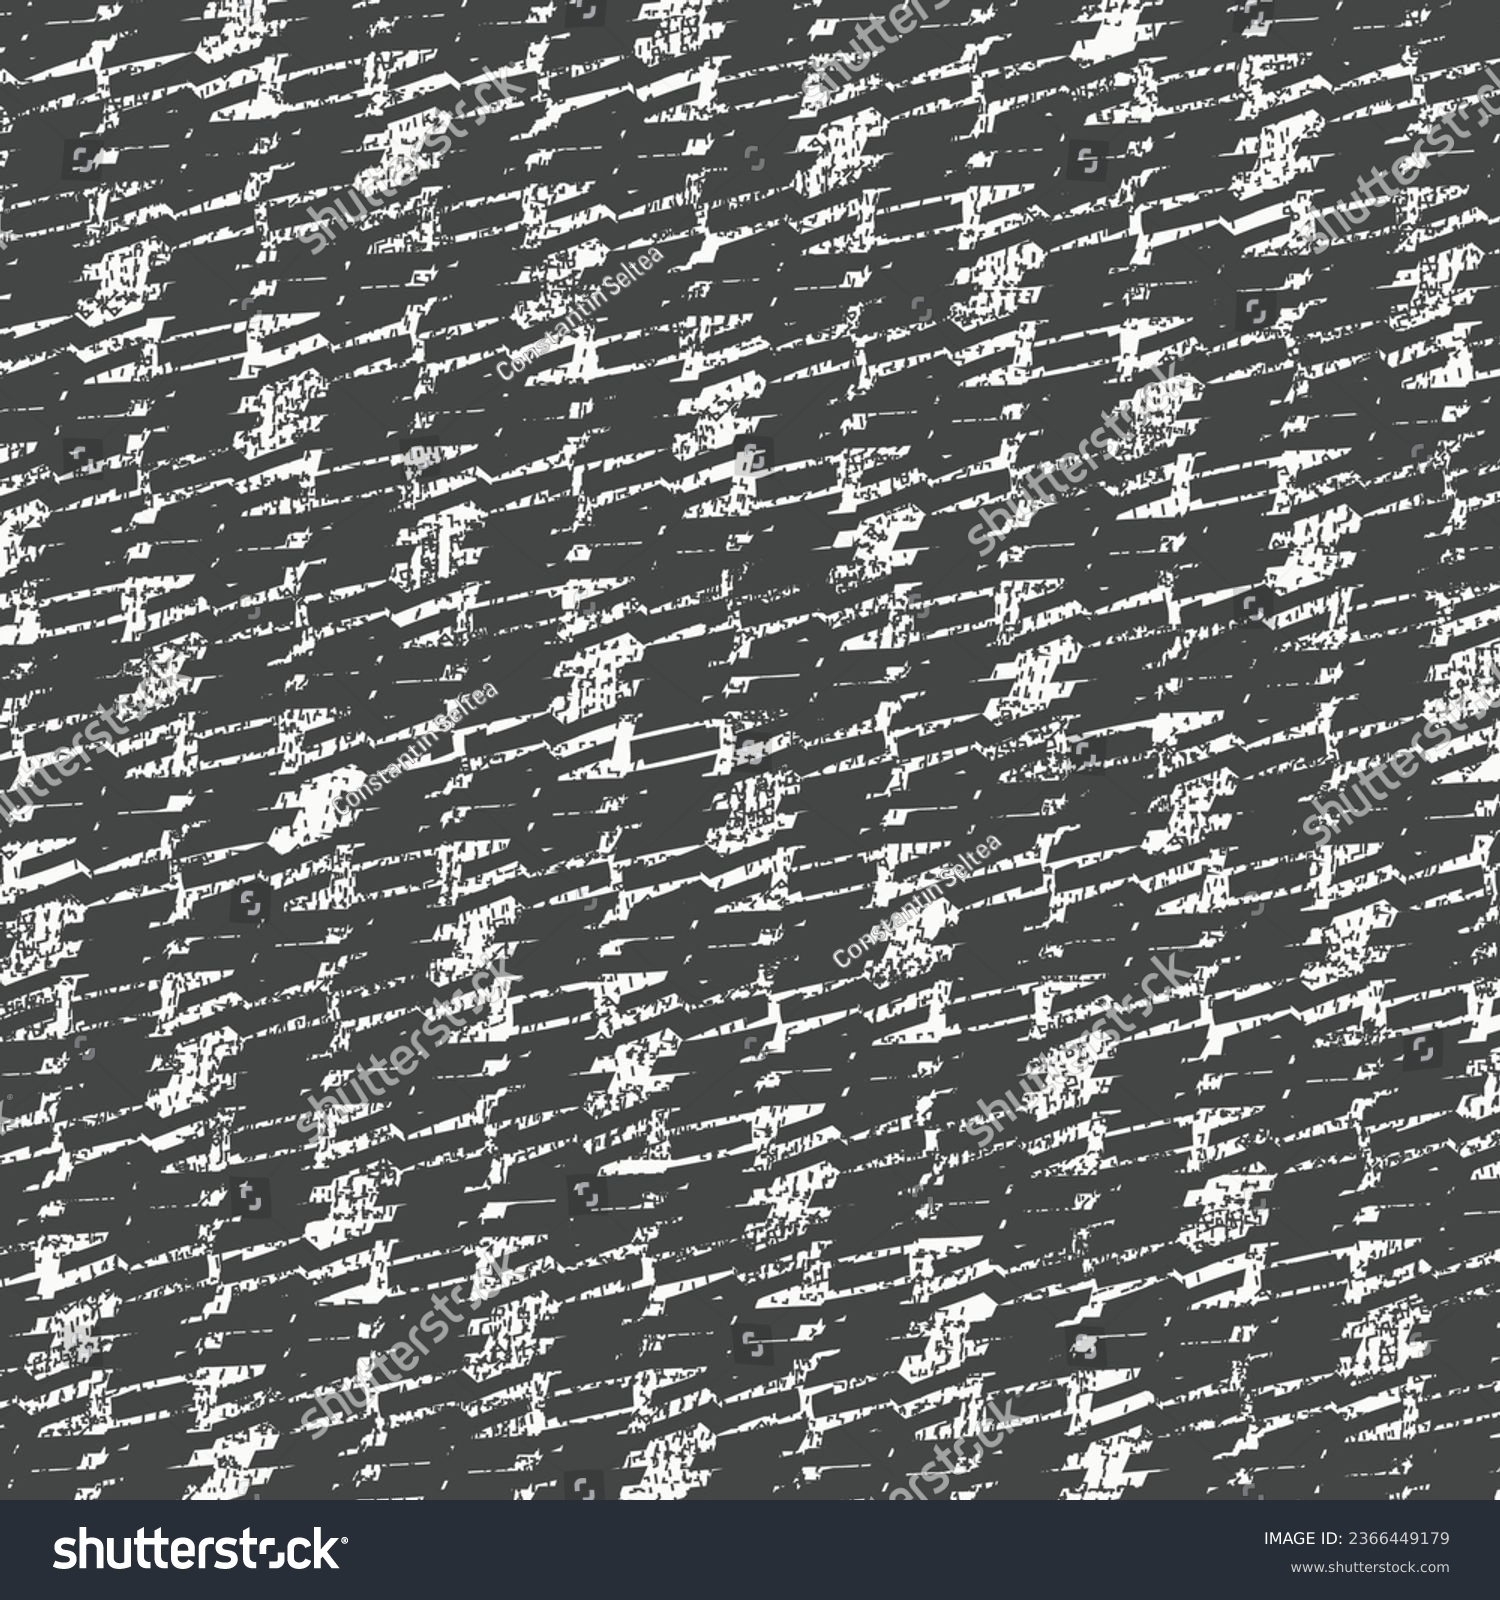 Old cloth with a checkered pattern. Retro textile design. Grunge fabric. Graphics in black and white. Abstract vector. #2366449179